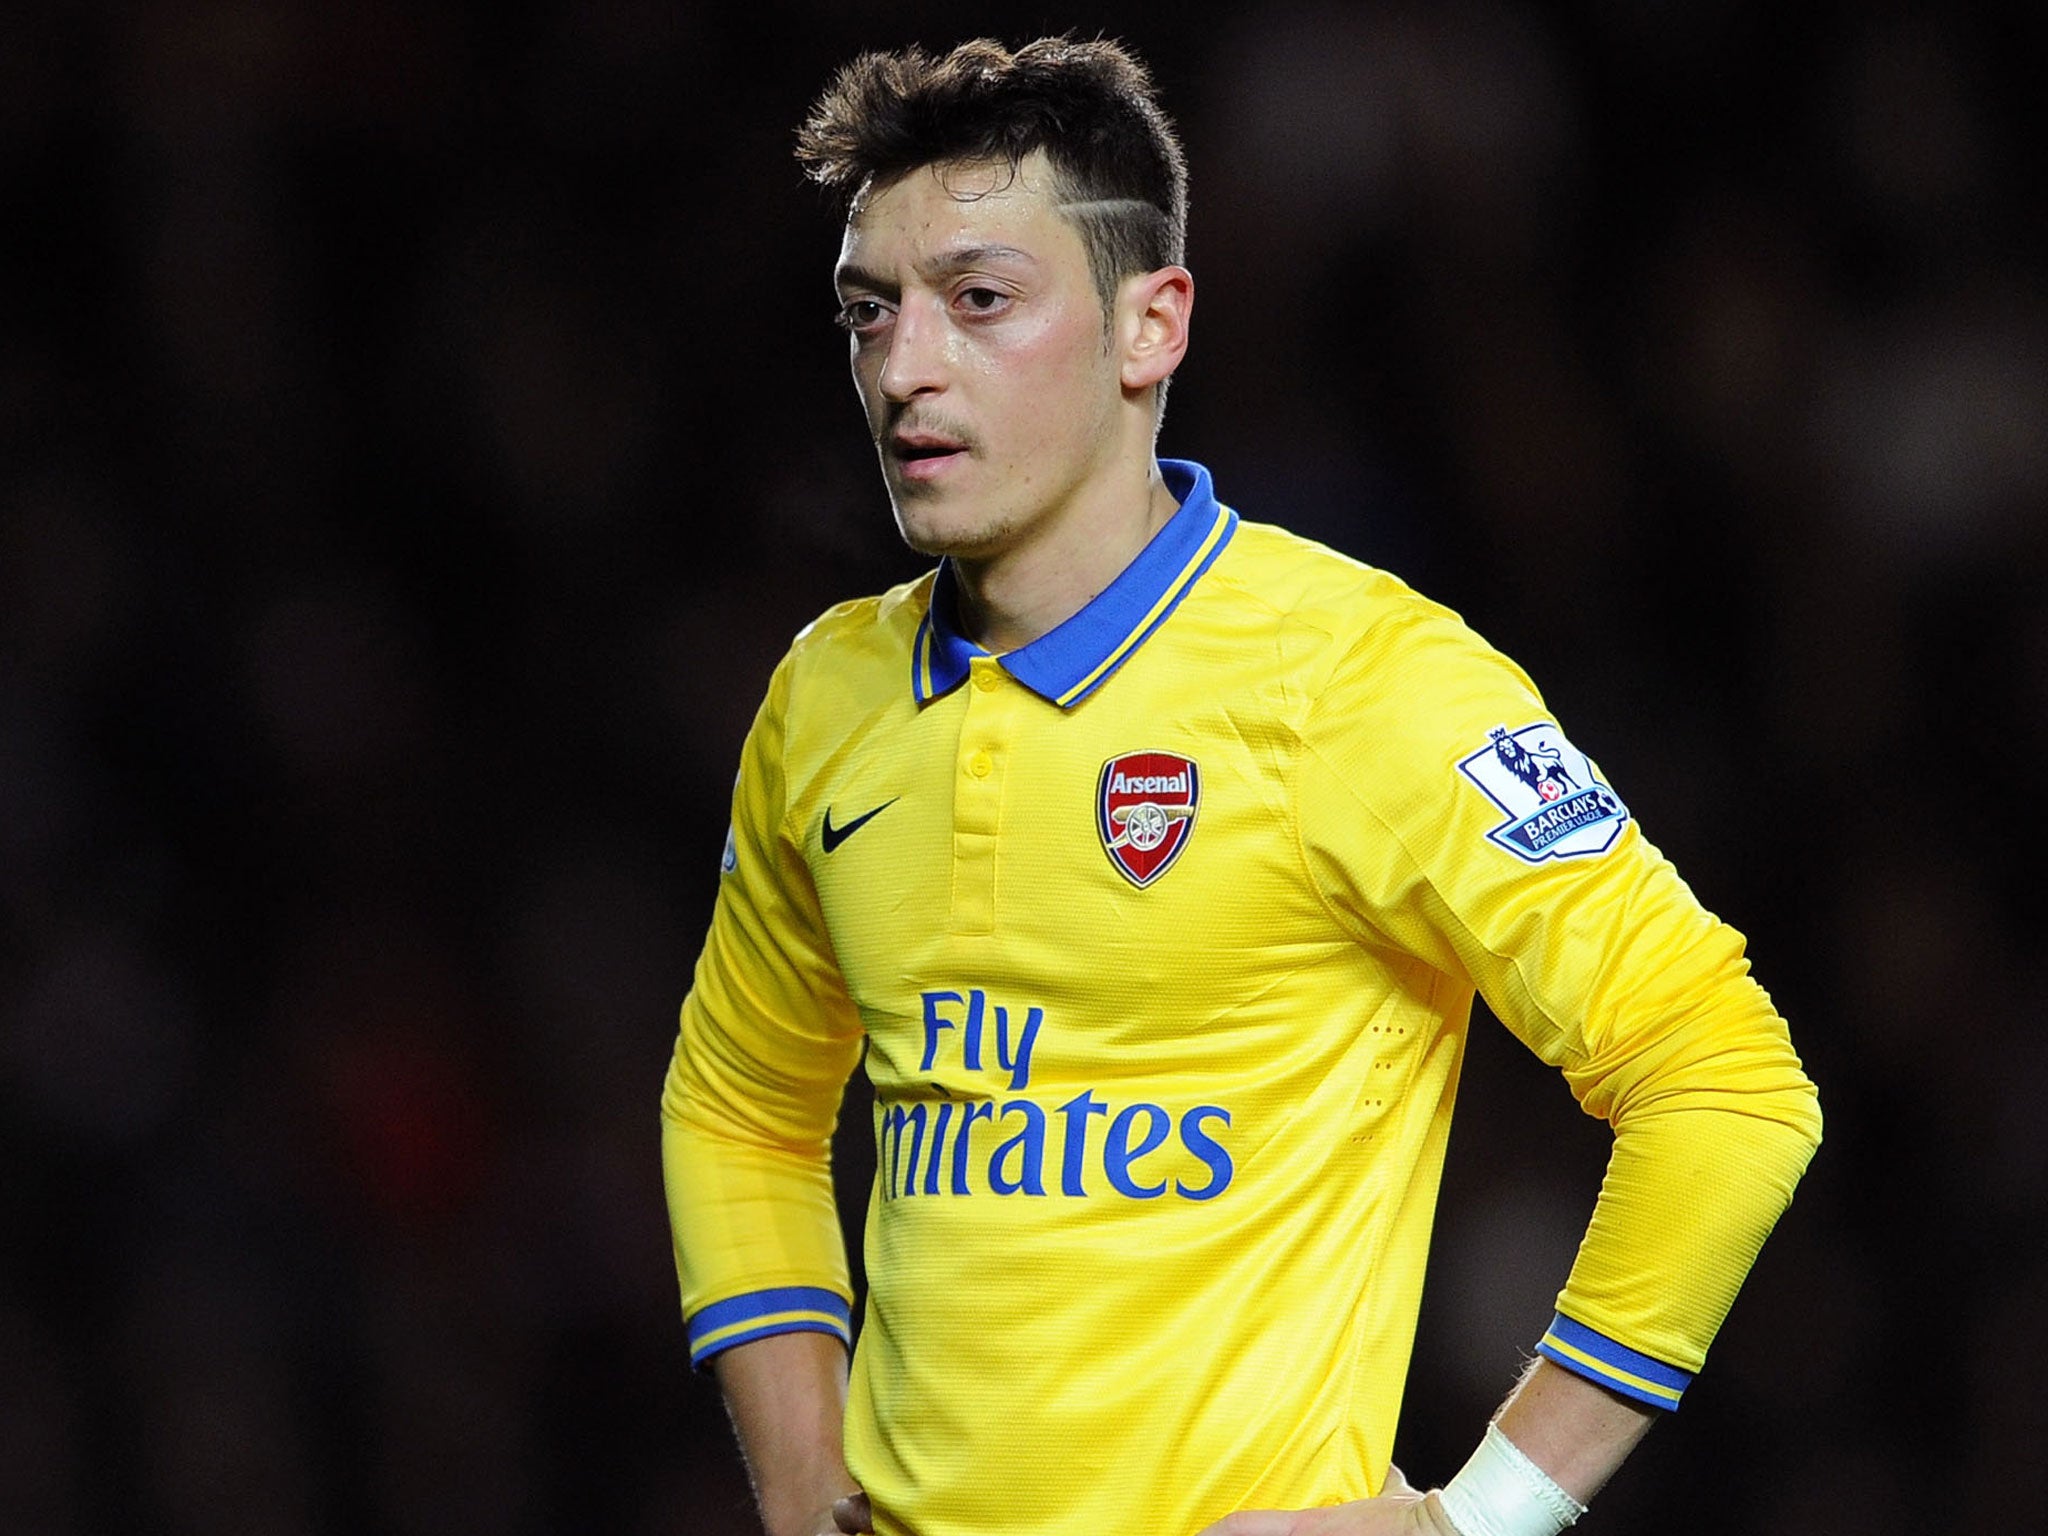 Mesut Ozil has struggled for Arsenal in recent matches